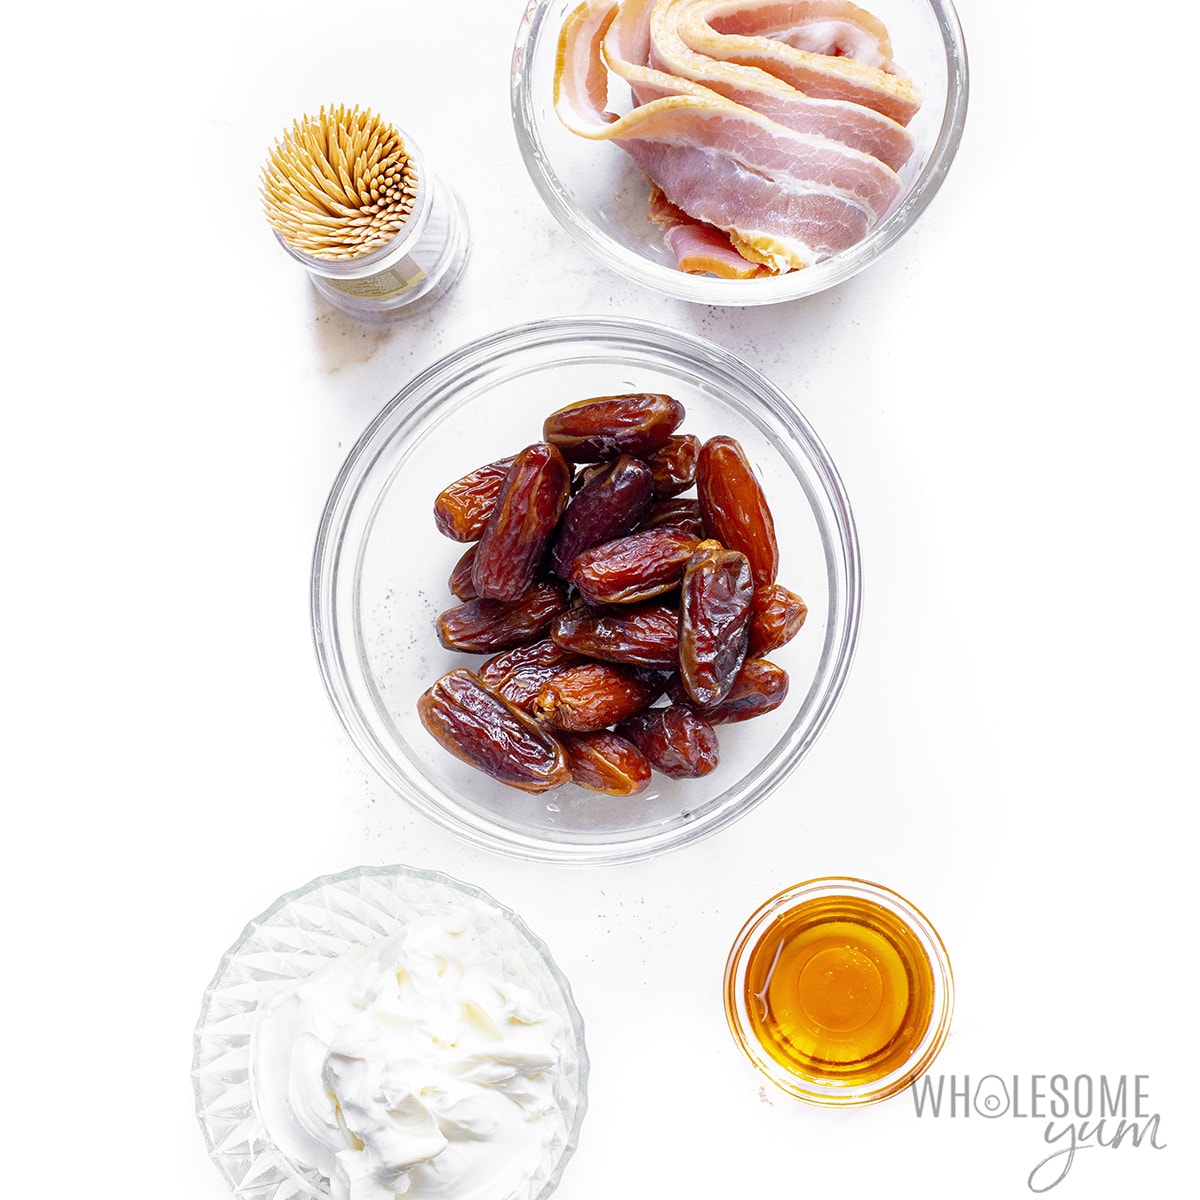 Bacon wrapped dates recipe ingredients in bowls.